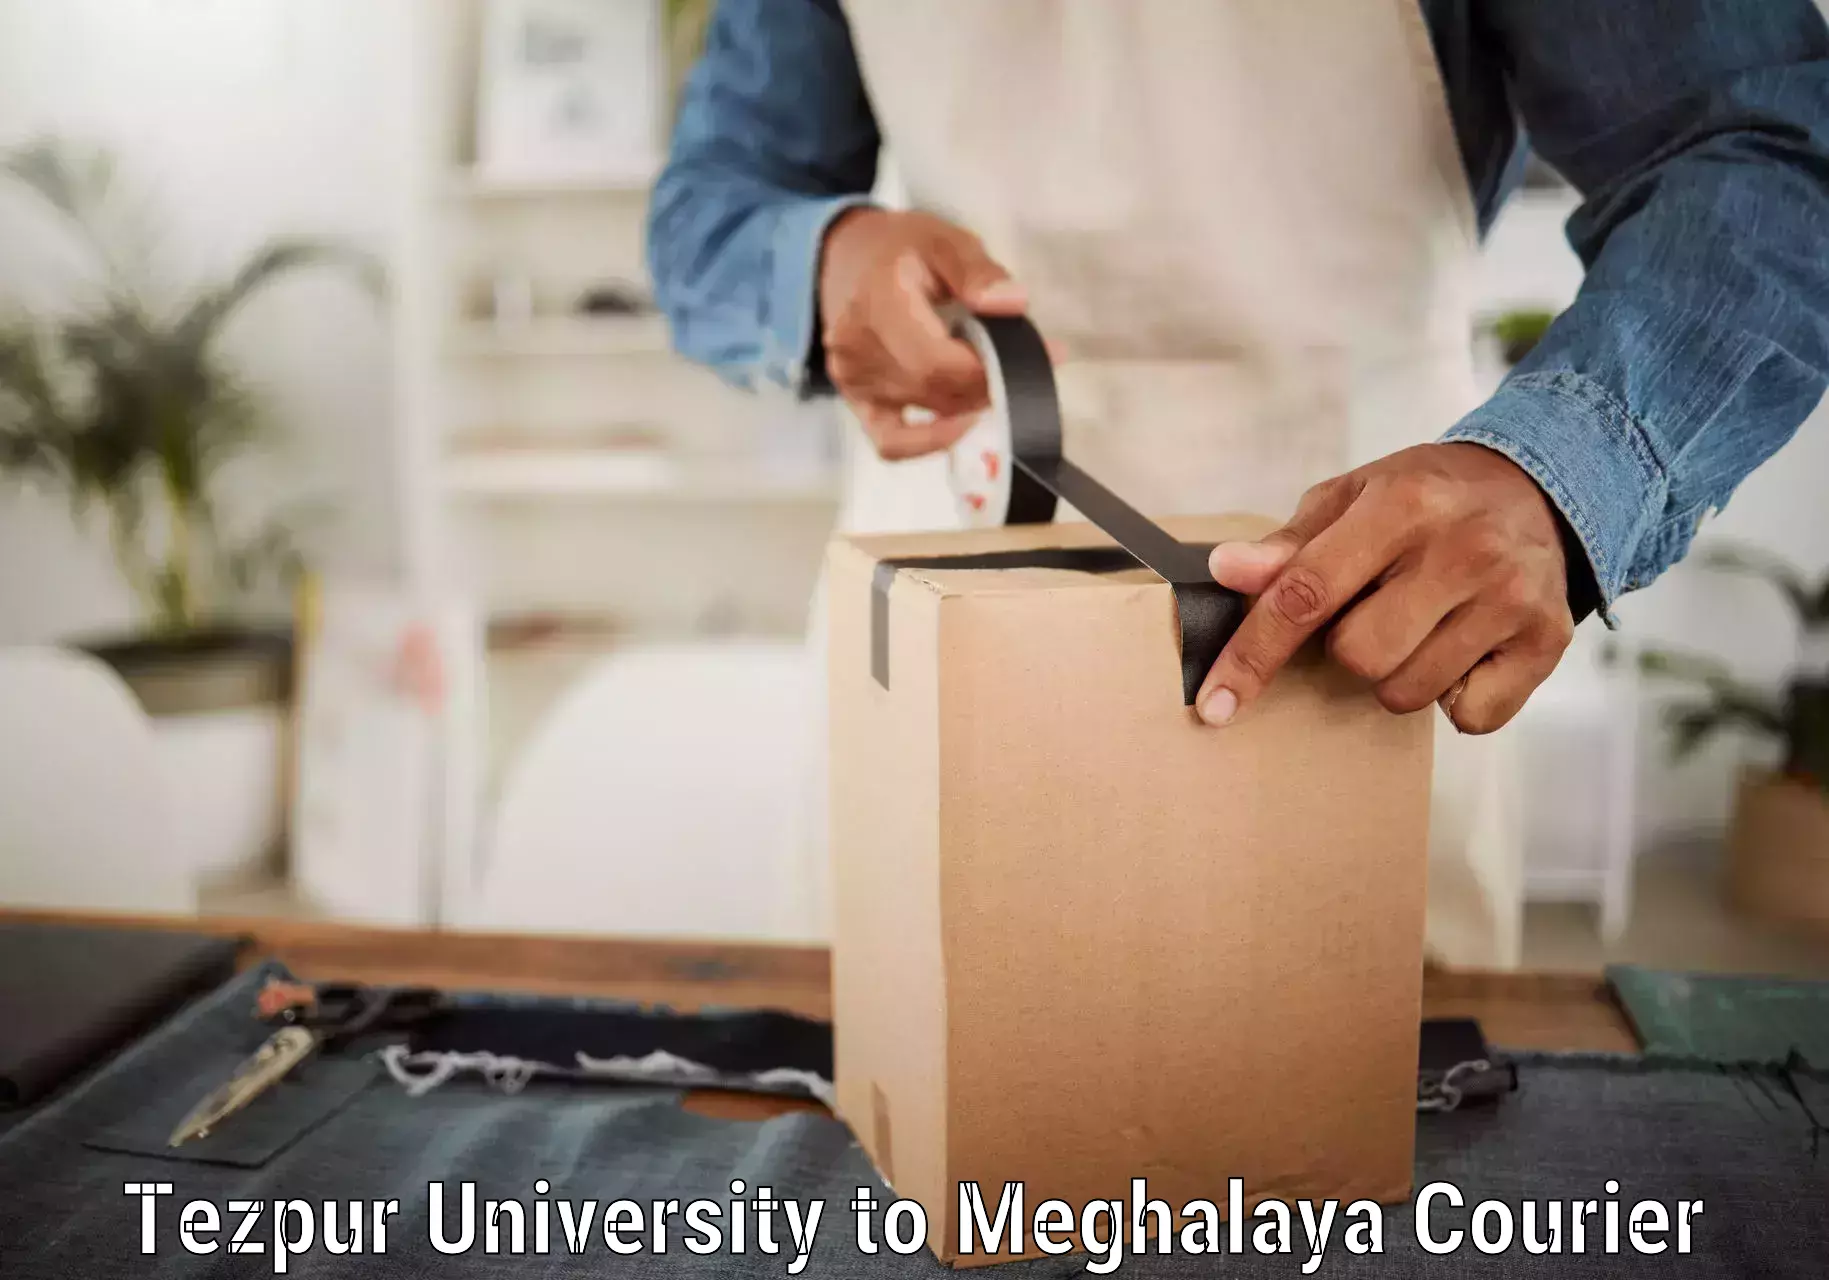 24-hour courier service Tezpur University to Marshillong